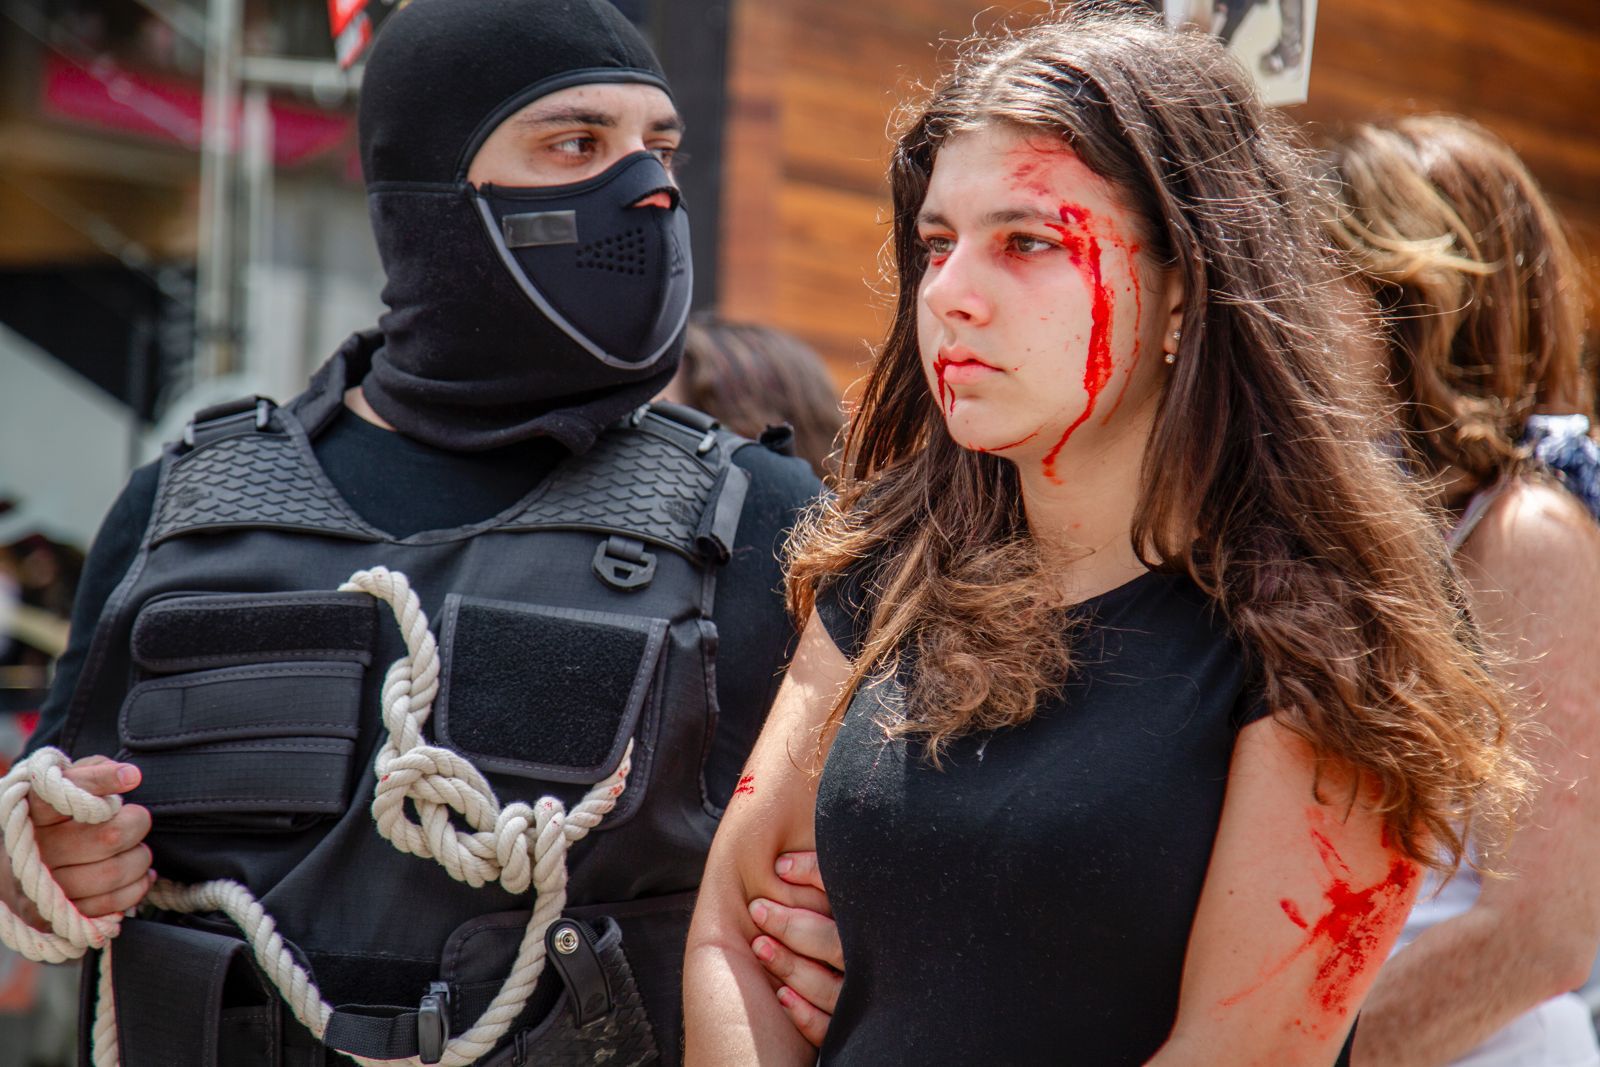 Bound and 'bloodied' girl shocks Brazilians into comprehending